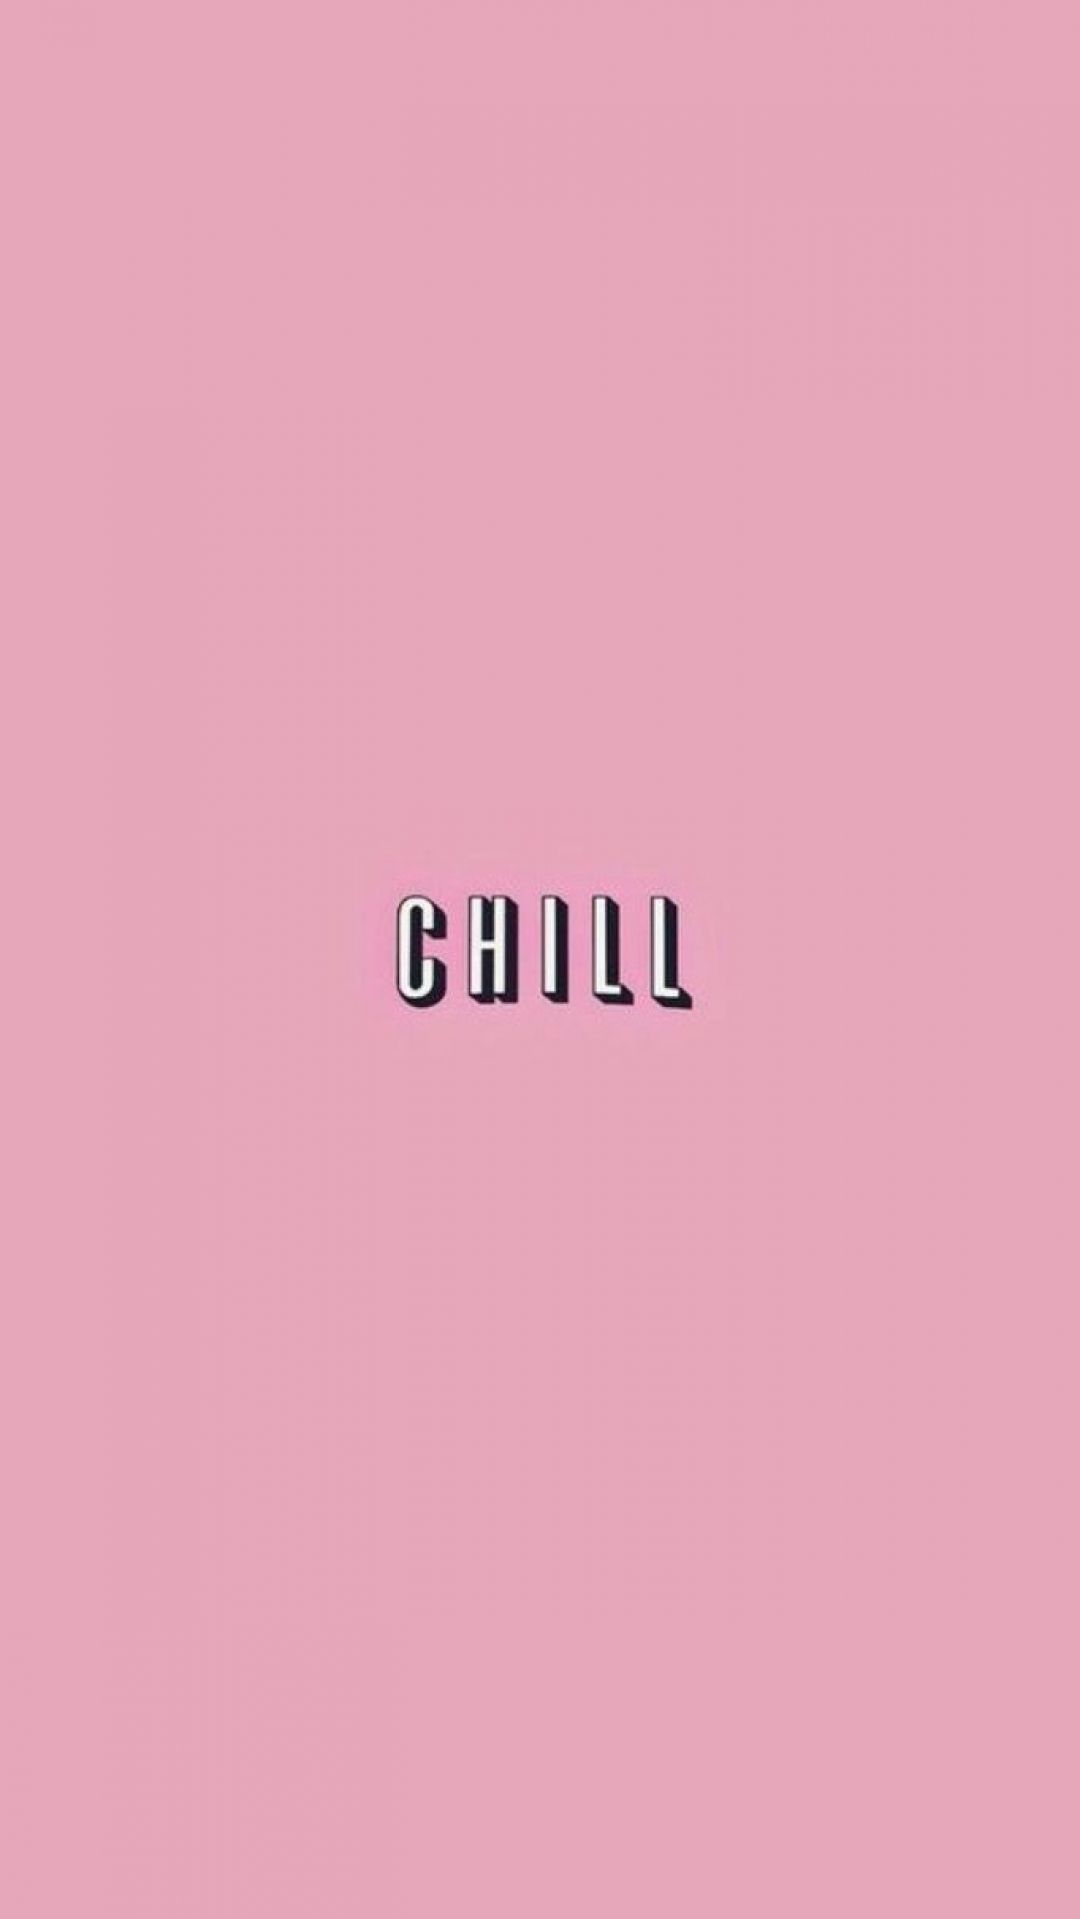 Chill Aesthetic HD Wallpaper (Desktop Background / Android / iPhone) (1080p, 4k) (1080x1919) (2020)